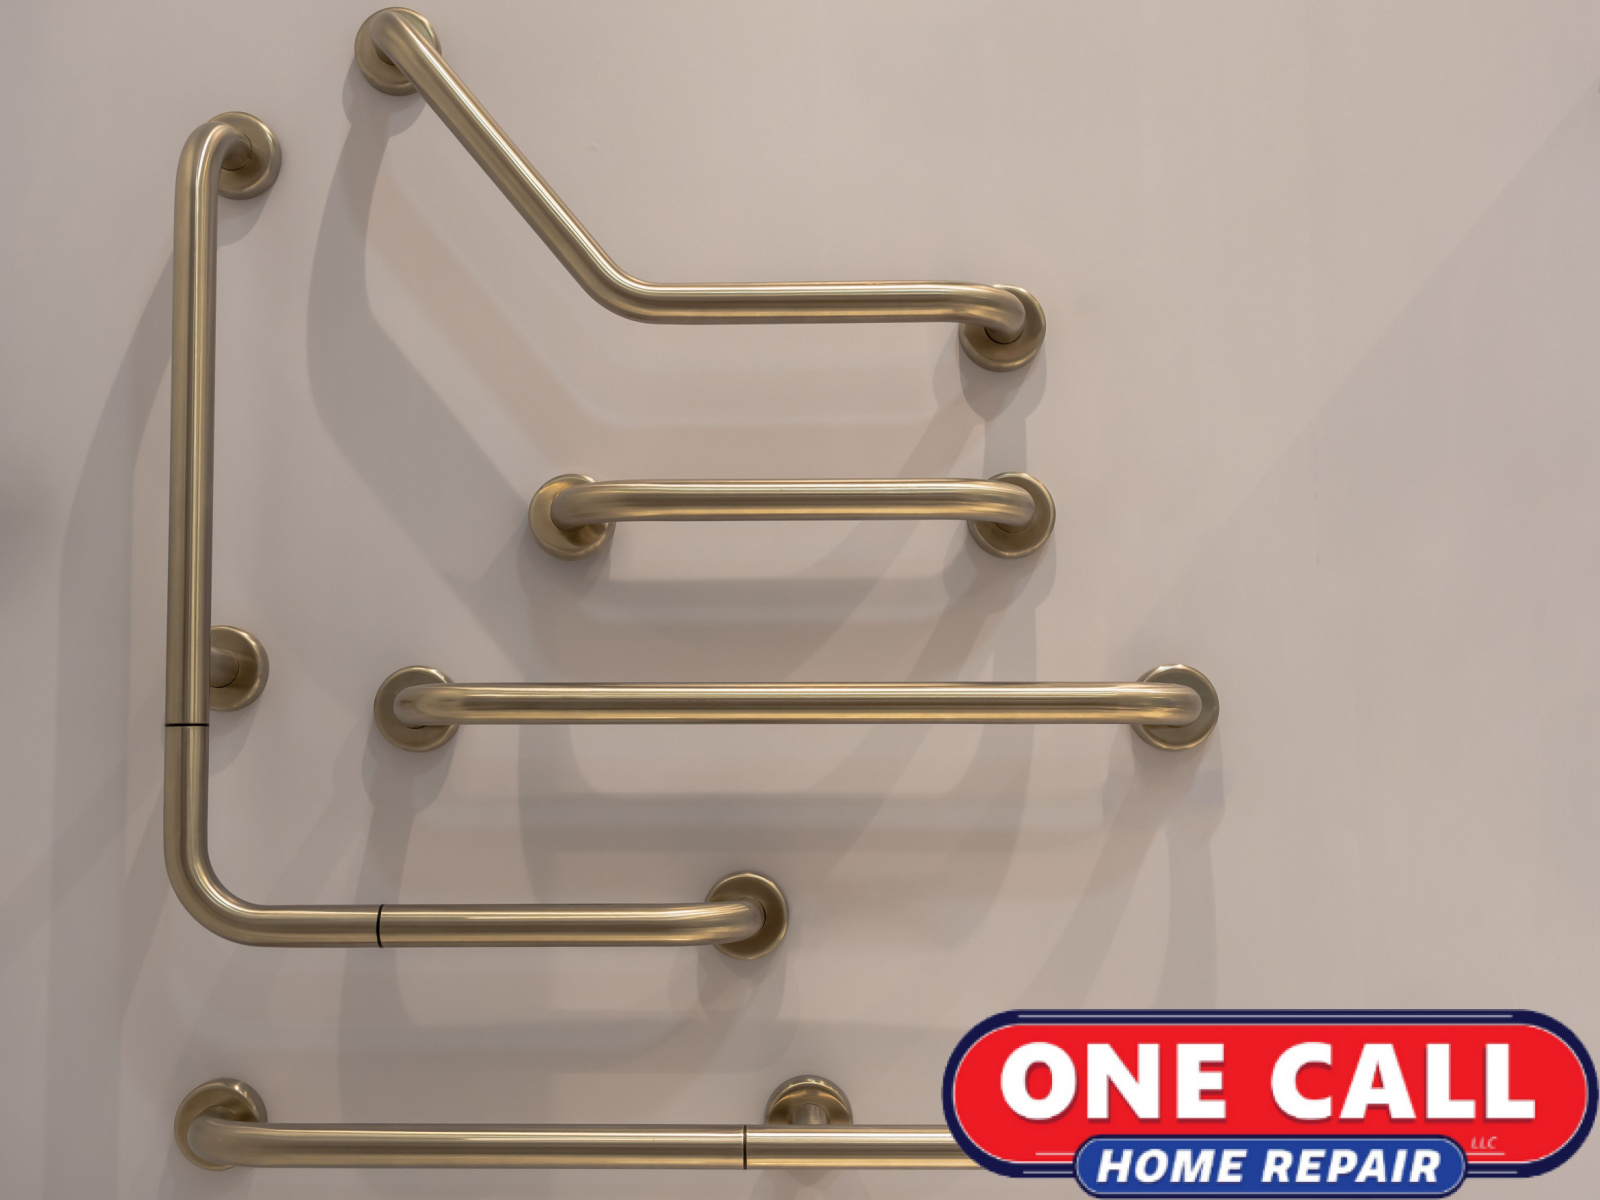 Where To Find Safe and Accessible ADA Handrail Grab Bar Installation in Sultan